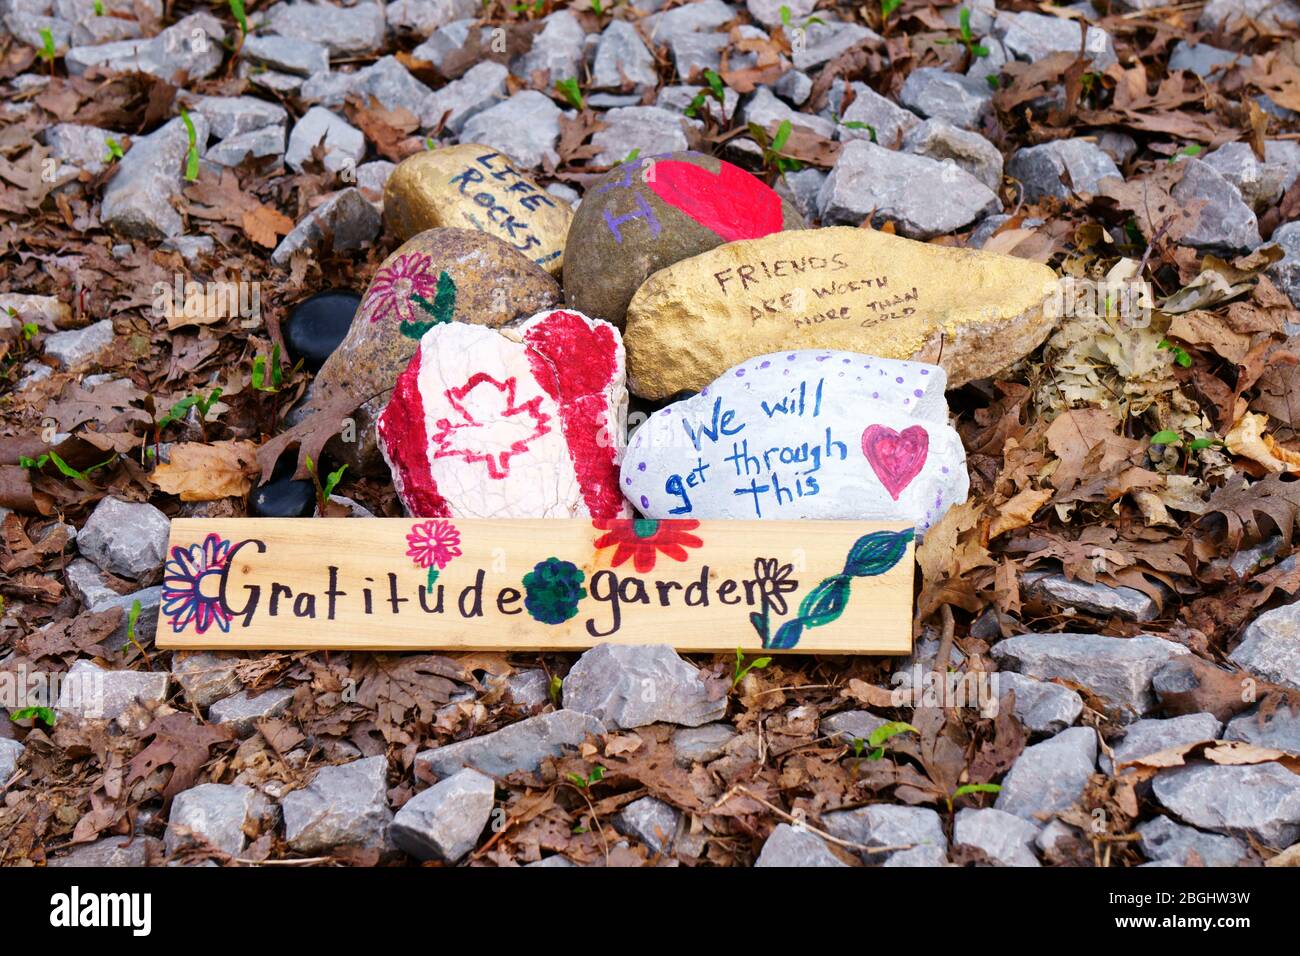 Rocks painted with encouraging words, hearts, flowers and Canadian Maple Leaf Flag, arranged by unknown people in midtown Toronto near an entrance to Moore Park Ravine trail during Covid-19 novel coronavirus outbreak. Photographed on April 20, 2020 Stock Photo